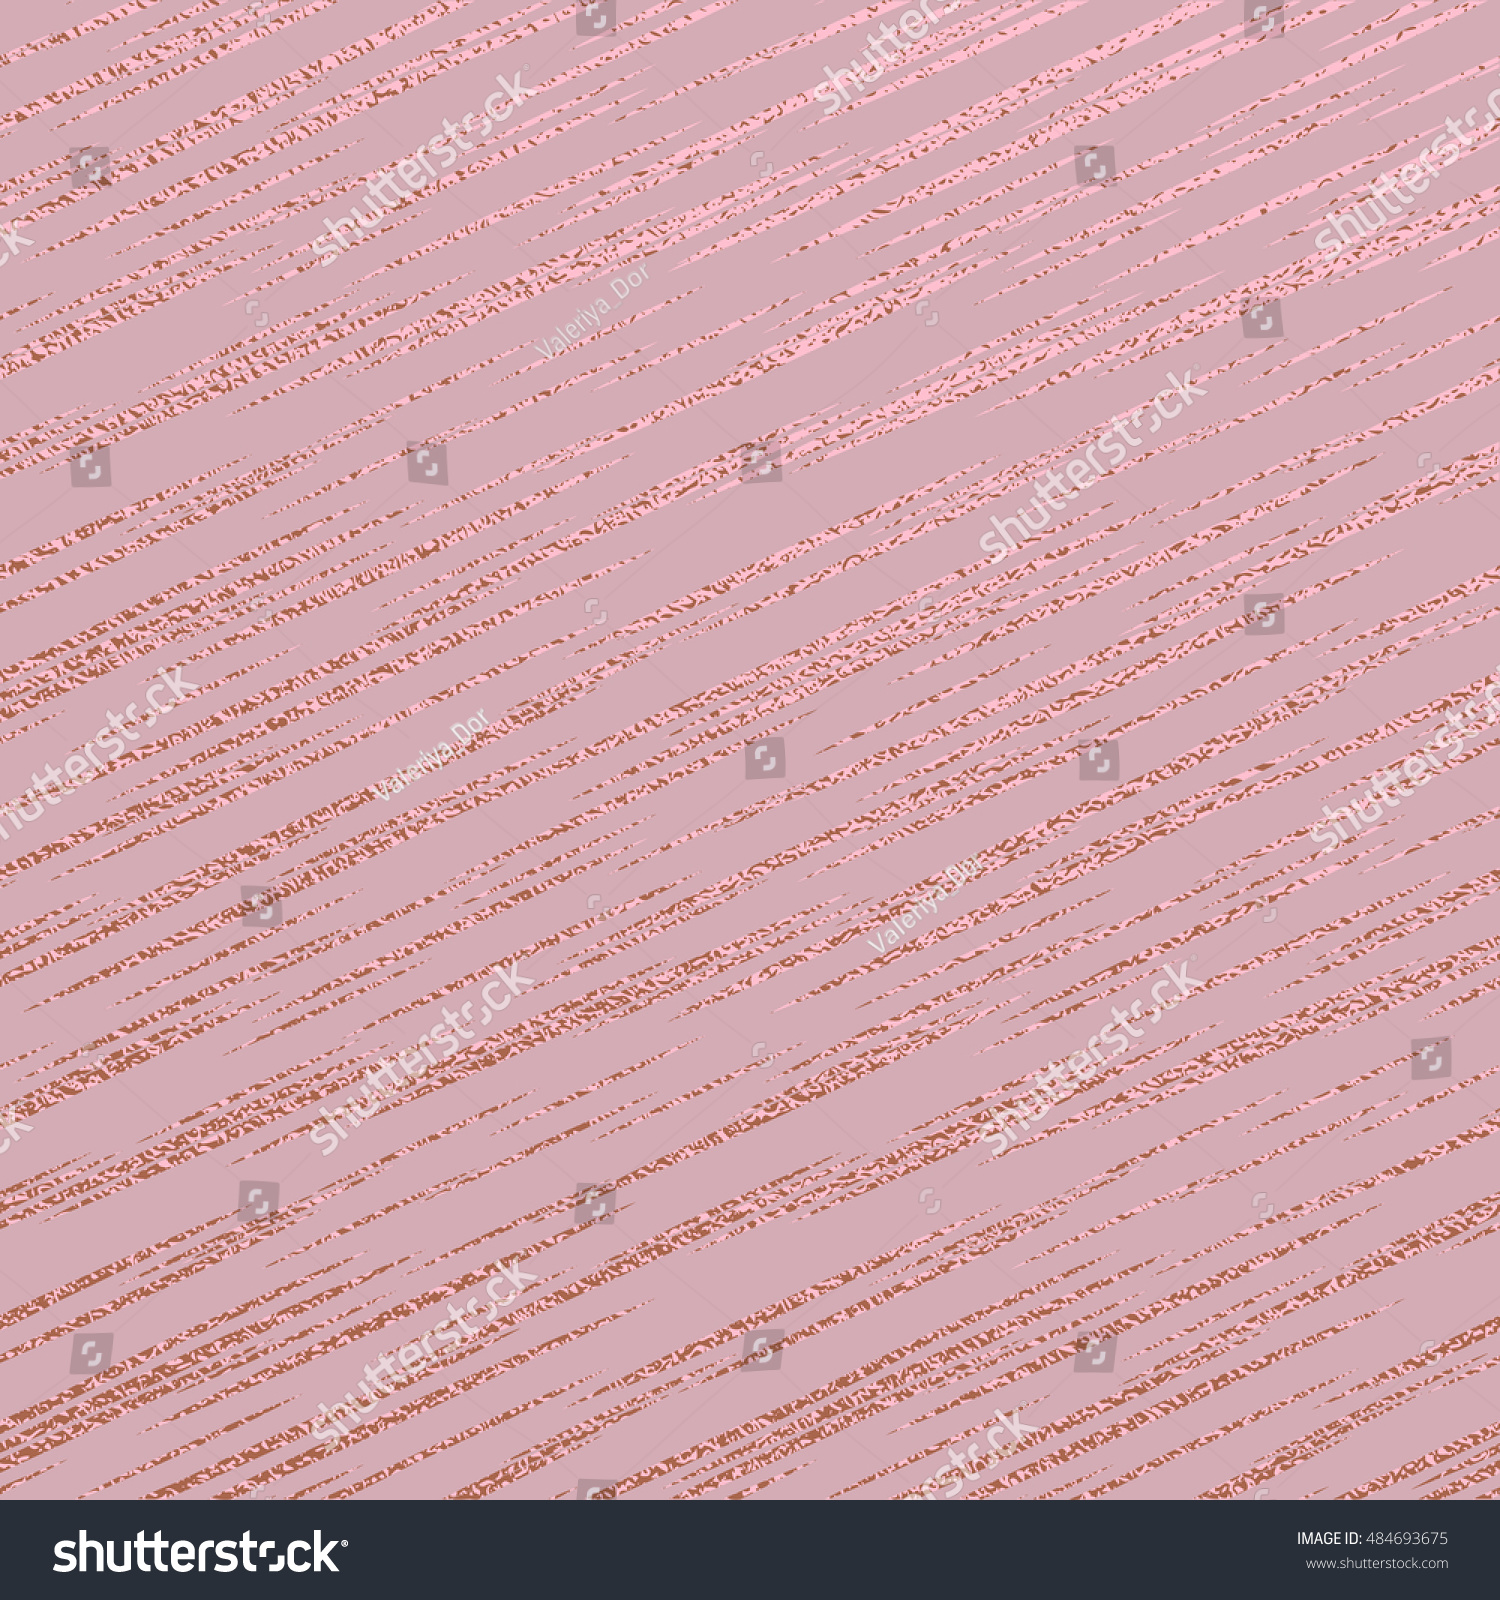 SVG of Metallic glossy texture. Metal rose quartz pattern. Abstract shiny background. Luxury sparkling background. svg